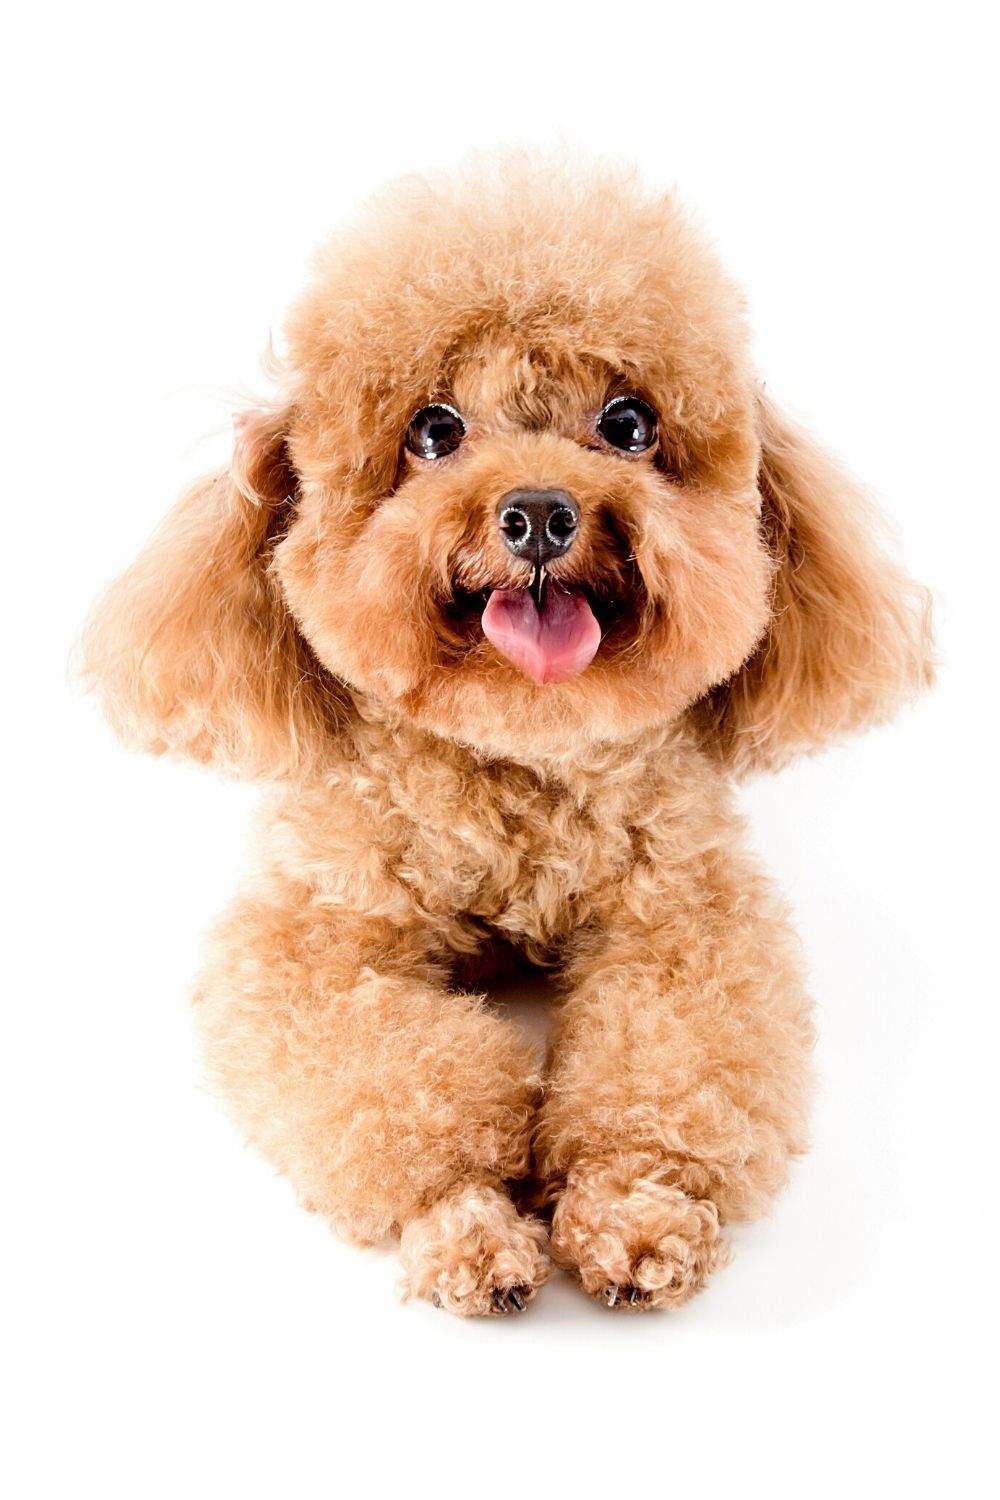 The Toy Poodle is another breed of dog that isn't a close resemblance to the Ewoks of Star Wars but is equally cute as the rest